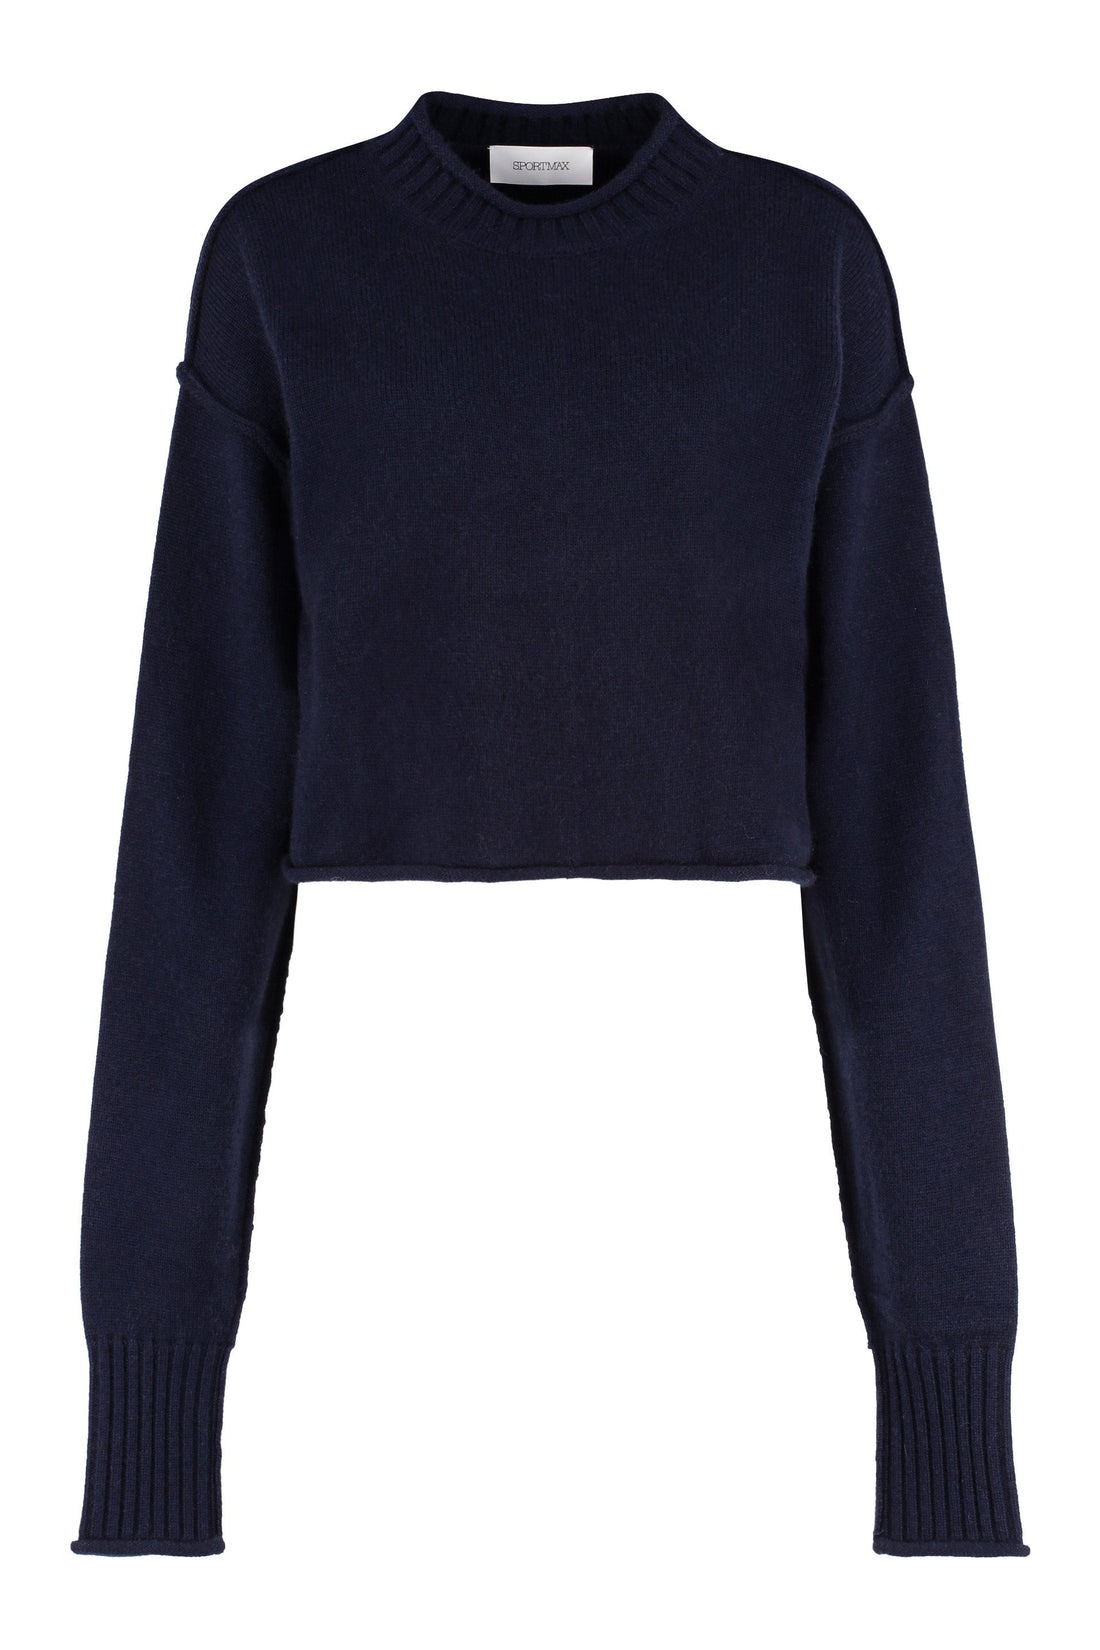 Max Mara-OUTLET-SALE-Sportmax - Maiorca crew-neck wool and cachemire sweater-ARCHIVIST